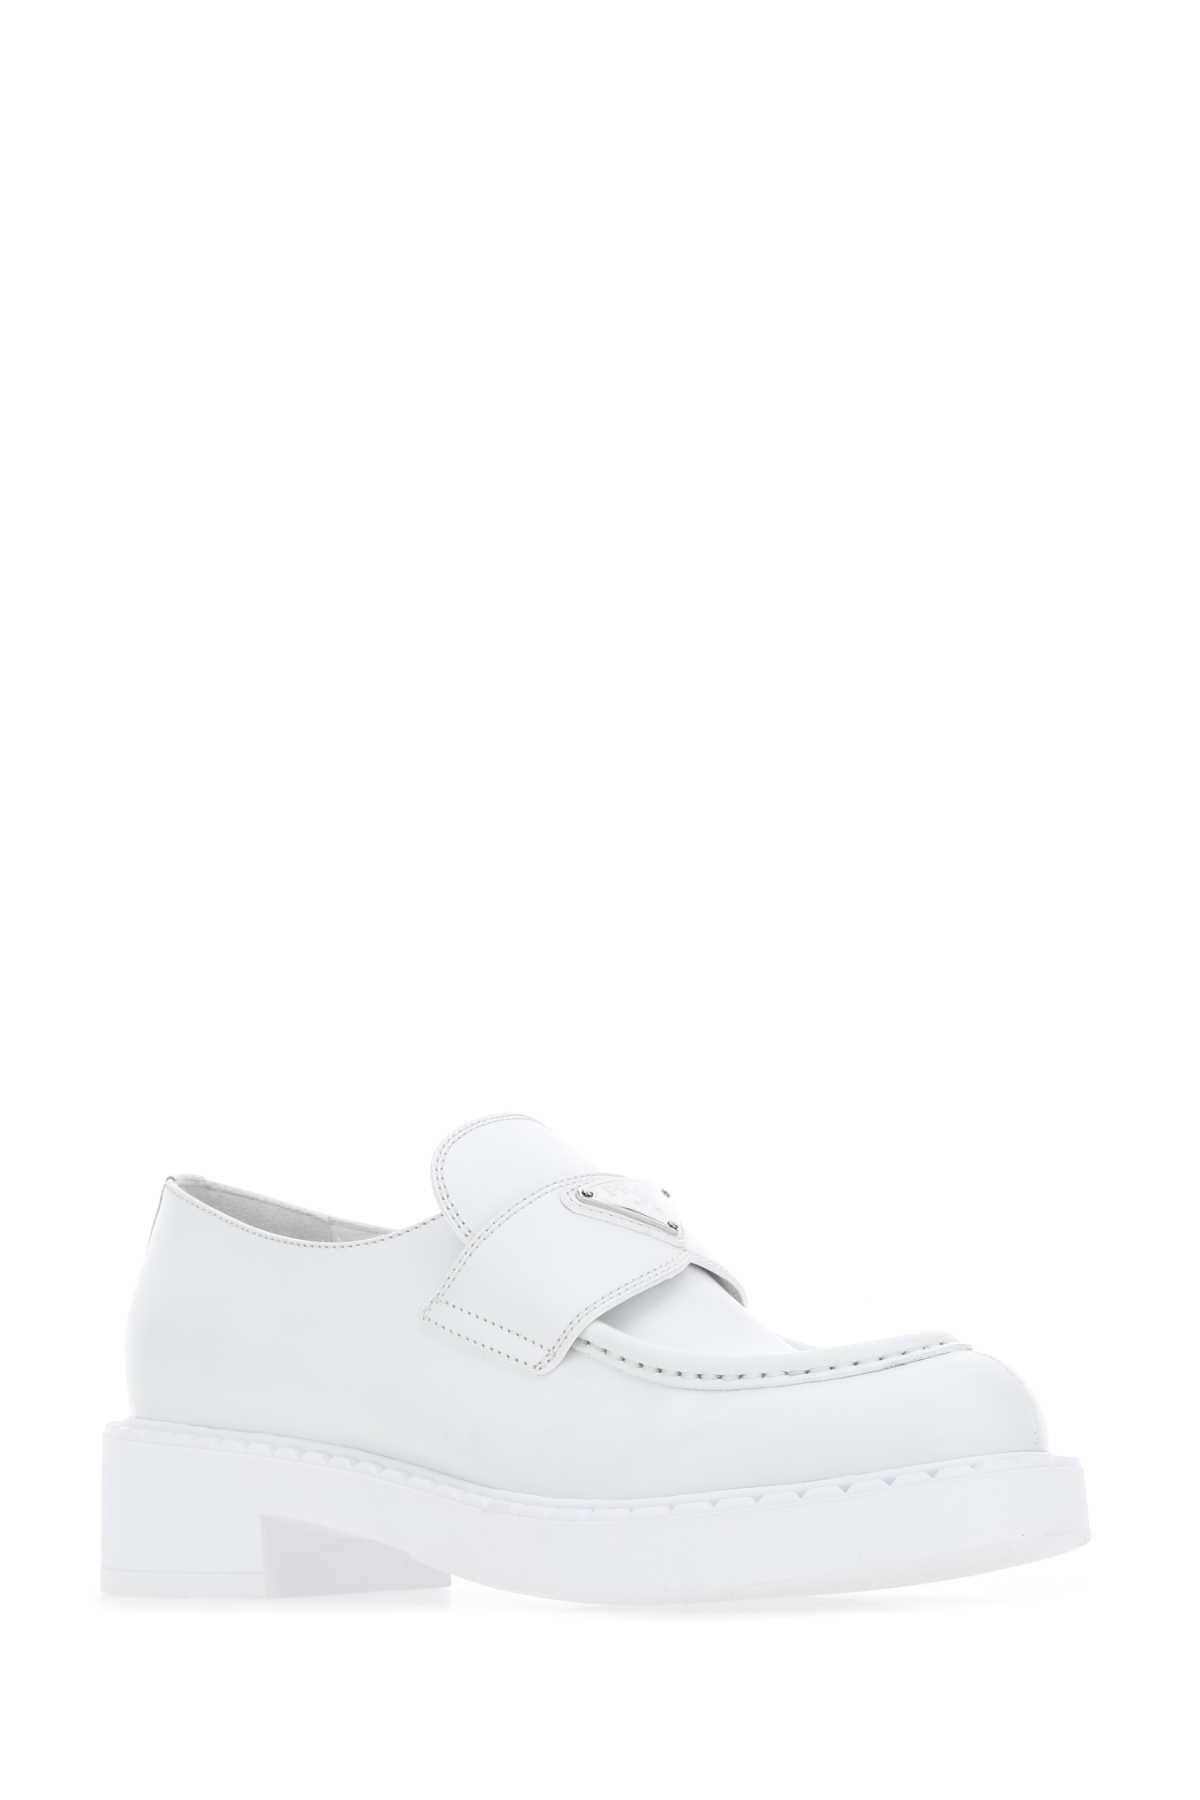 Shop Prada White Leather Loafers In Bianco